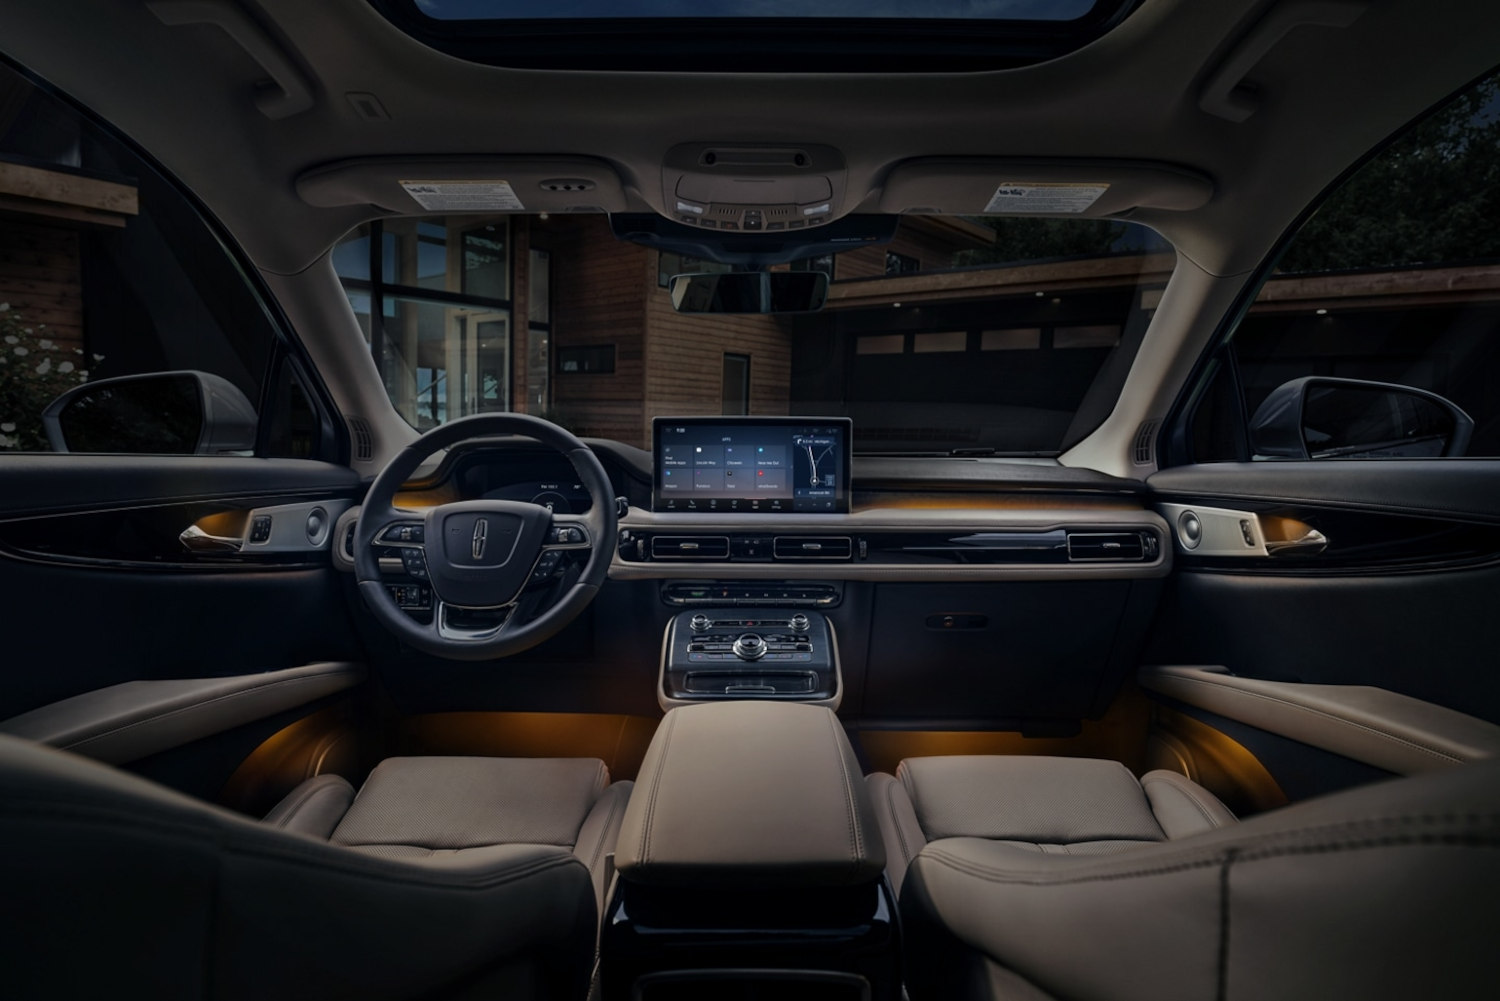 Inside the most popular Lincoln SUV, the Nautilus